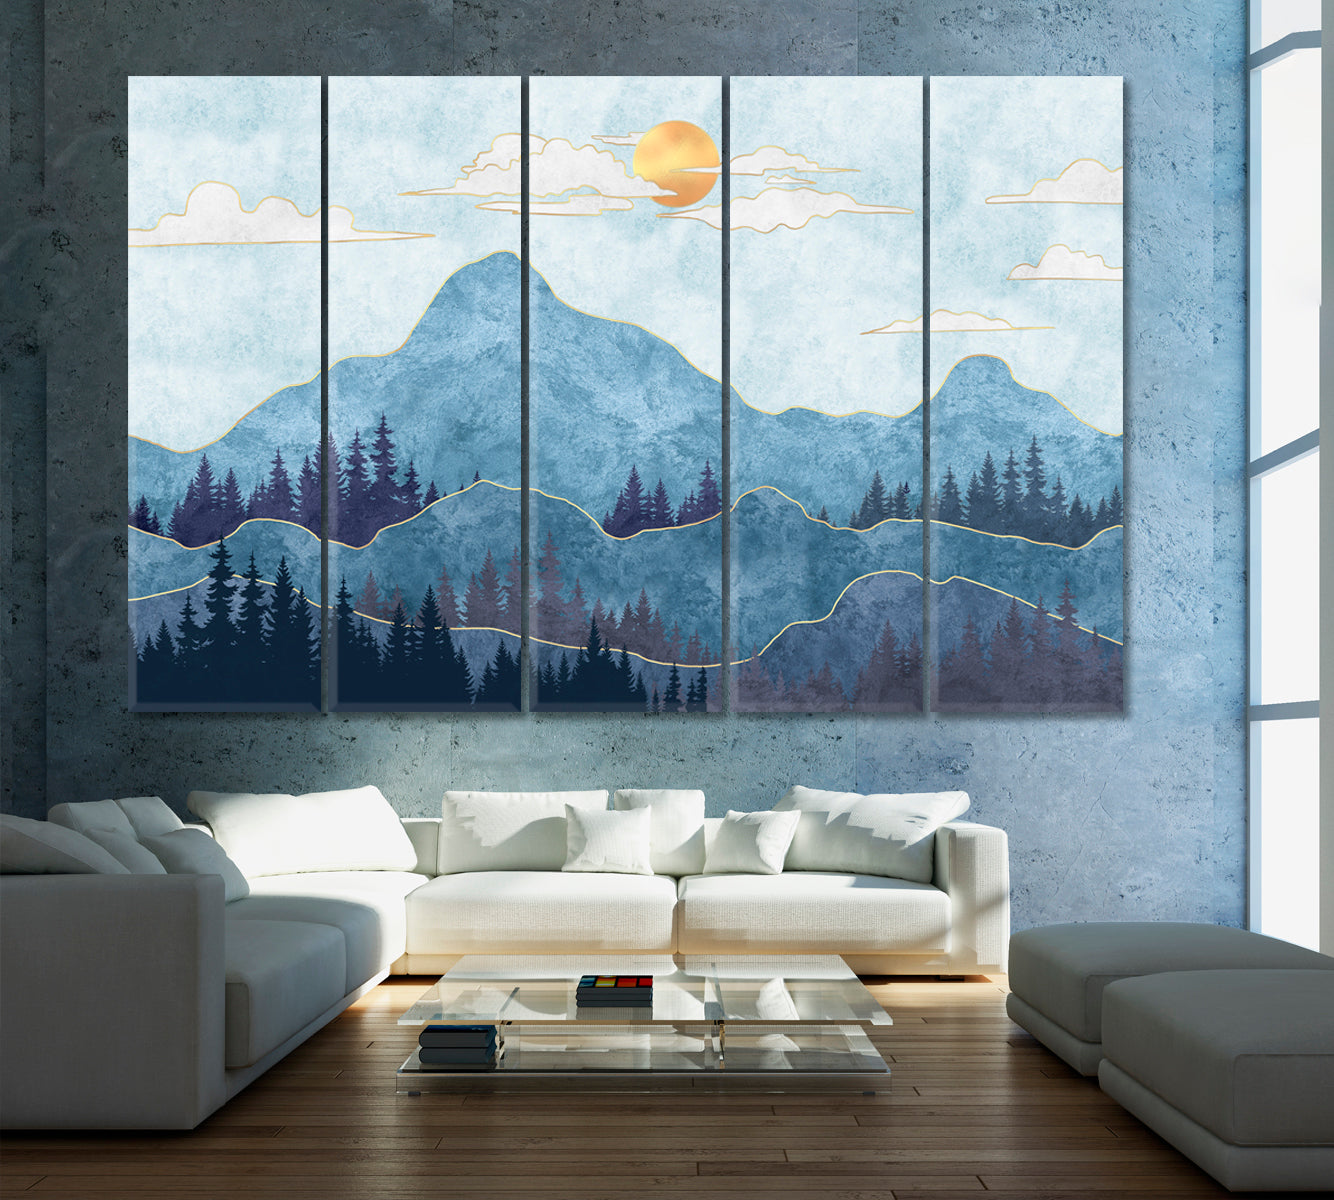 Modern Mountains Landscape Canvas Print ArtLexy 5 Panels 36"x24" inches 